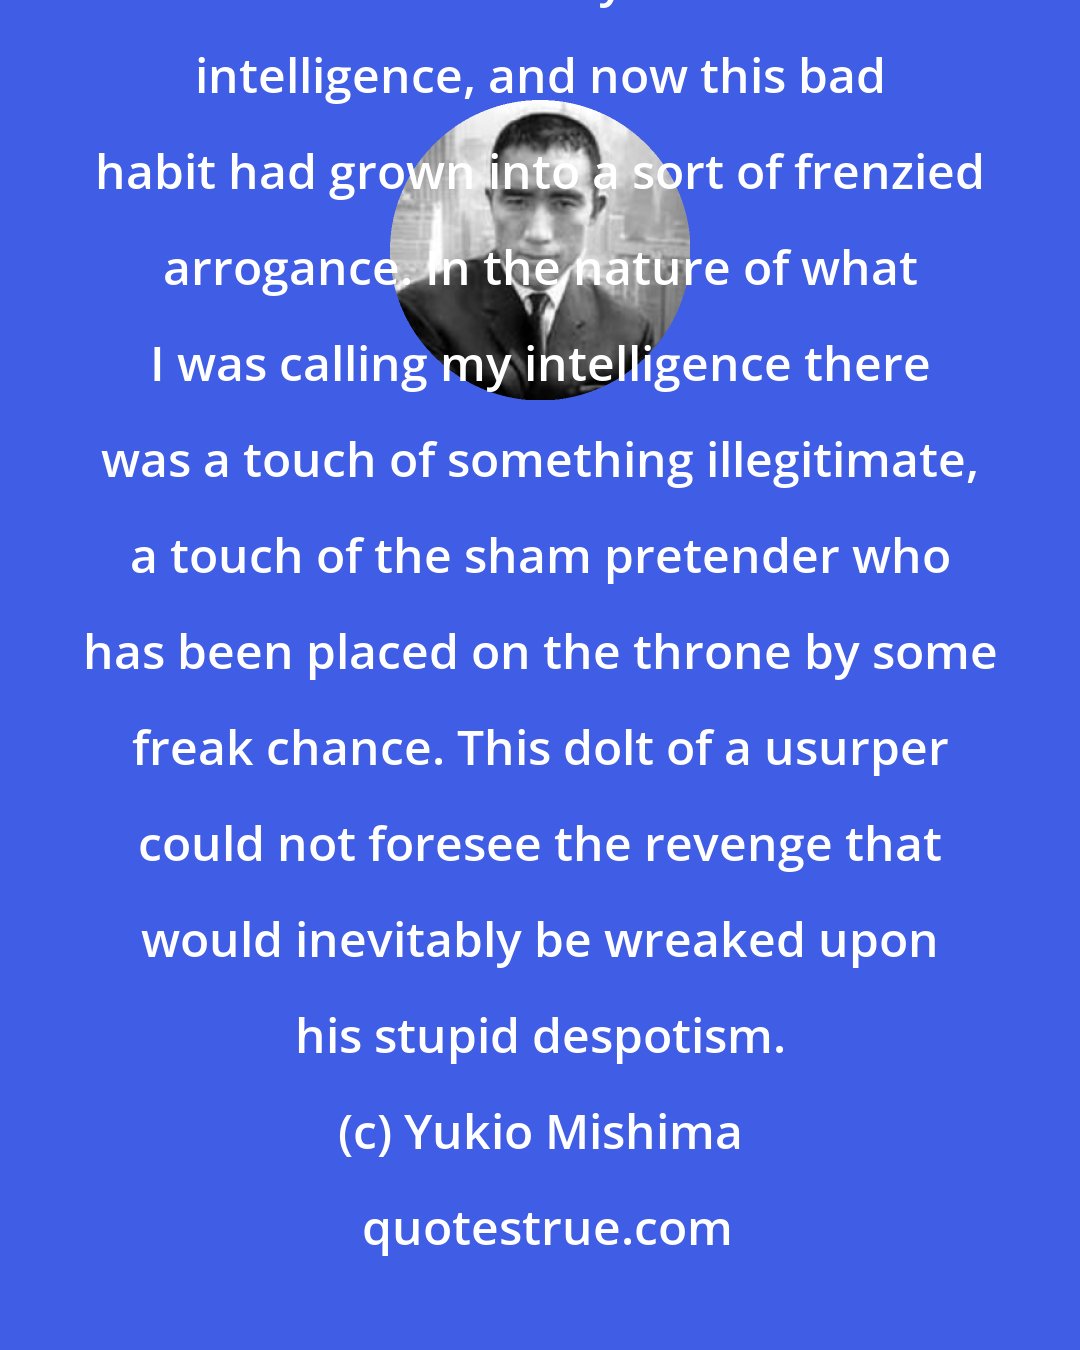 Yukio Mishima: I had long since insisted upon interpreting the things that Fate forced me to do as victories of my own will and intelligence, and now this bad habit had grown into a sort of frenzied arrogance. In the nature of what I was calling my intelligence there was a touch of something illegitimate, a touch of the sham pretender who has been placed on the throne by some freak chance. This dolt of a usurper could not foresee the revenge that would inevitably be wreaked upon his stupid despotism.